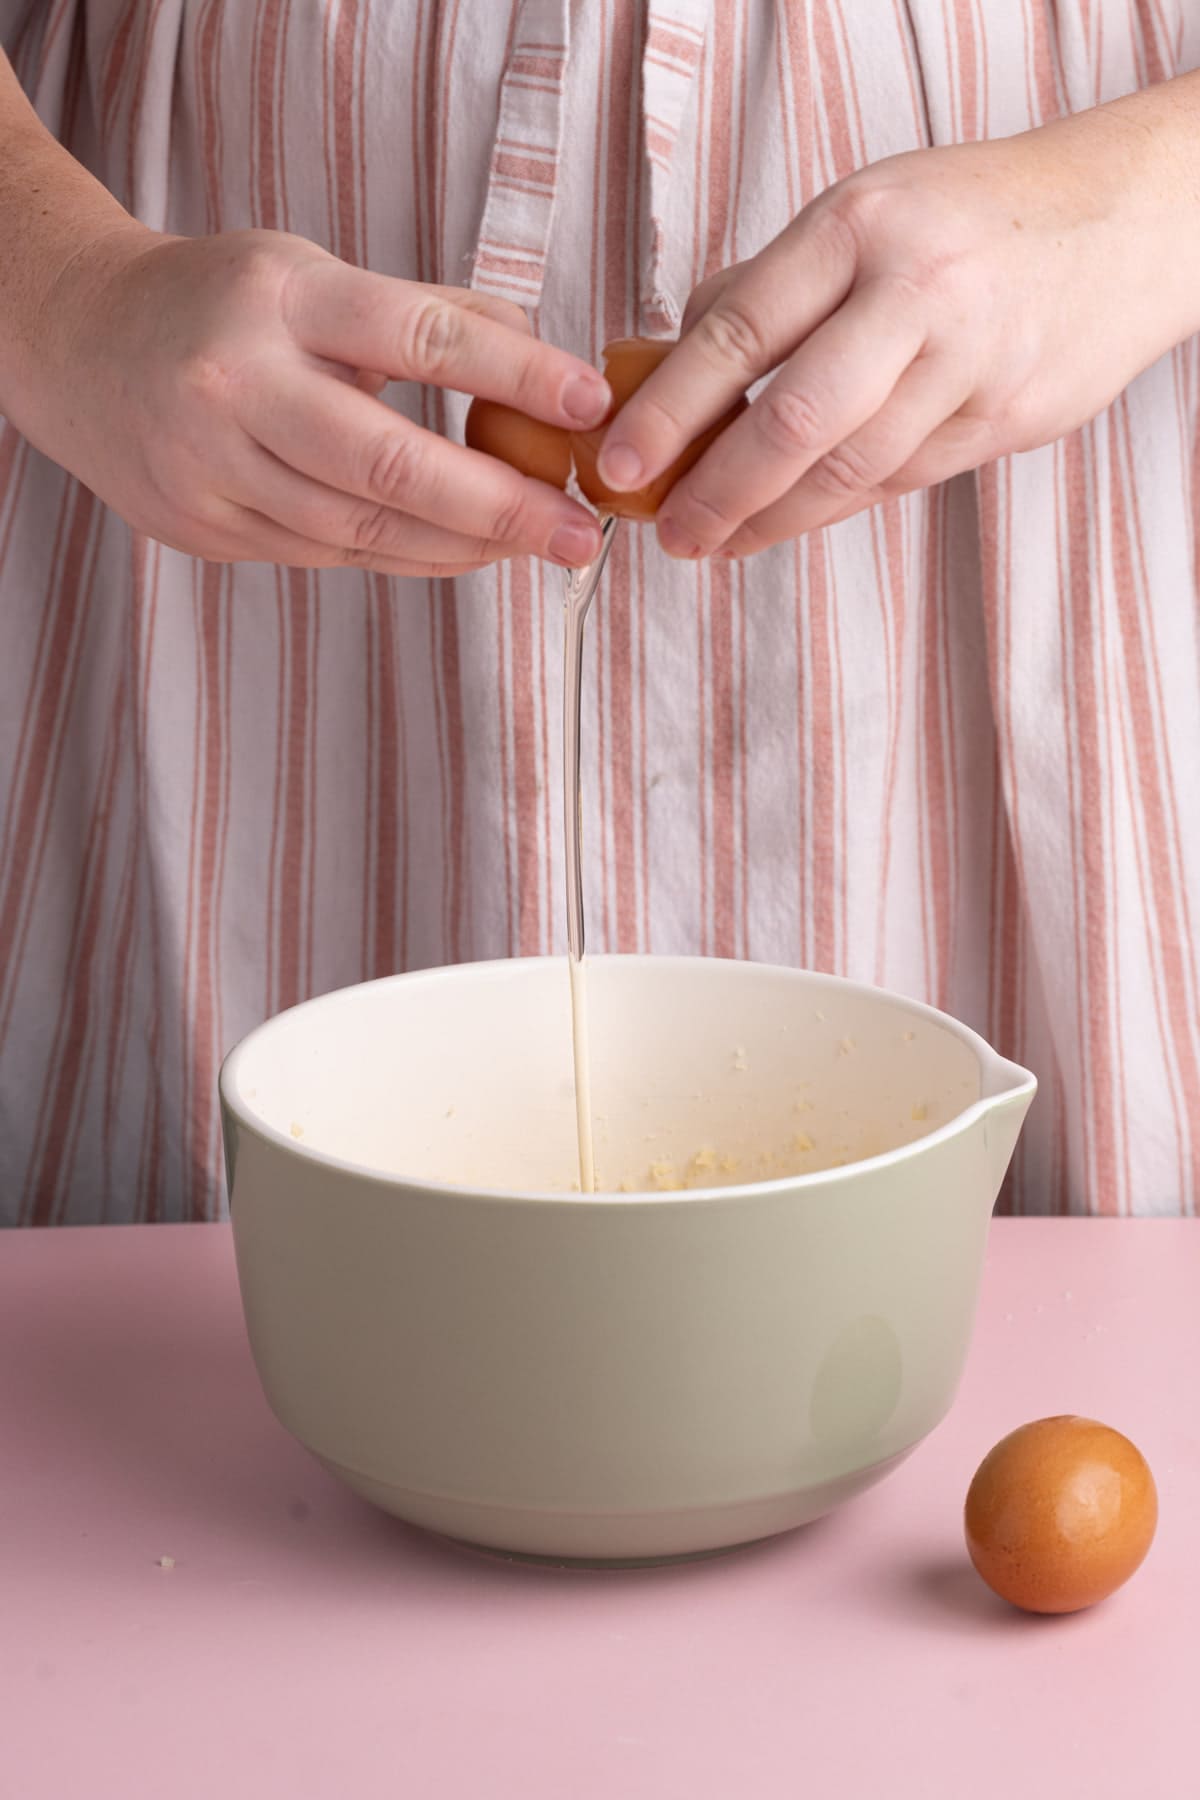 Cracking an egg into a mixing bowl with sugar, butter, and vanilla extract.